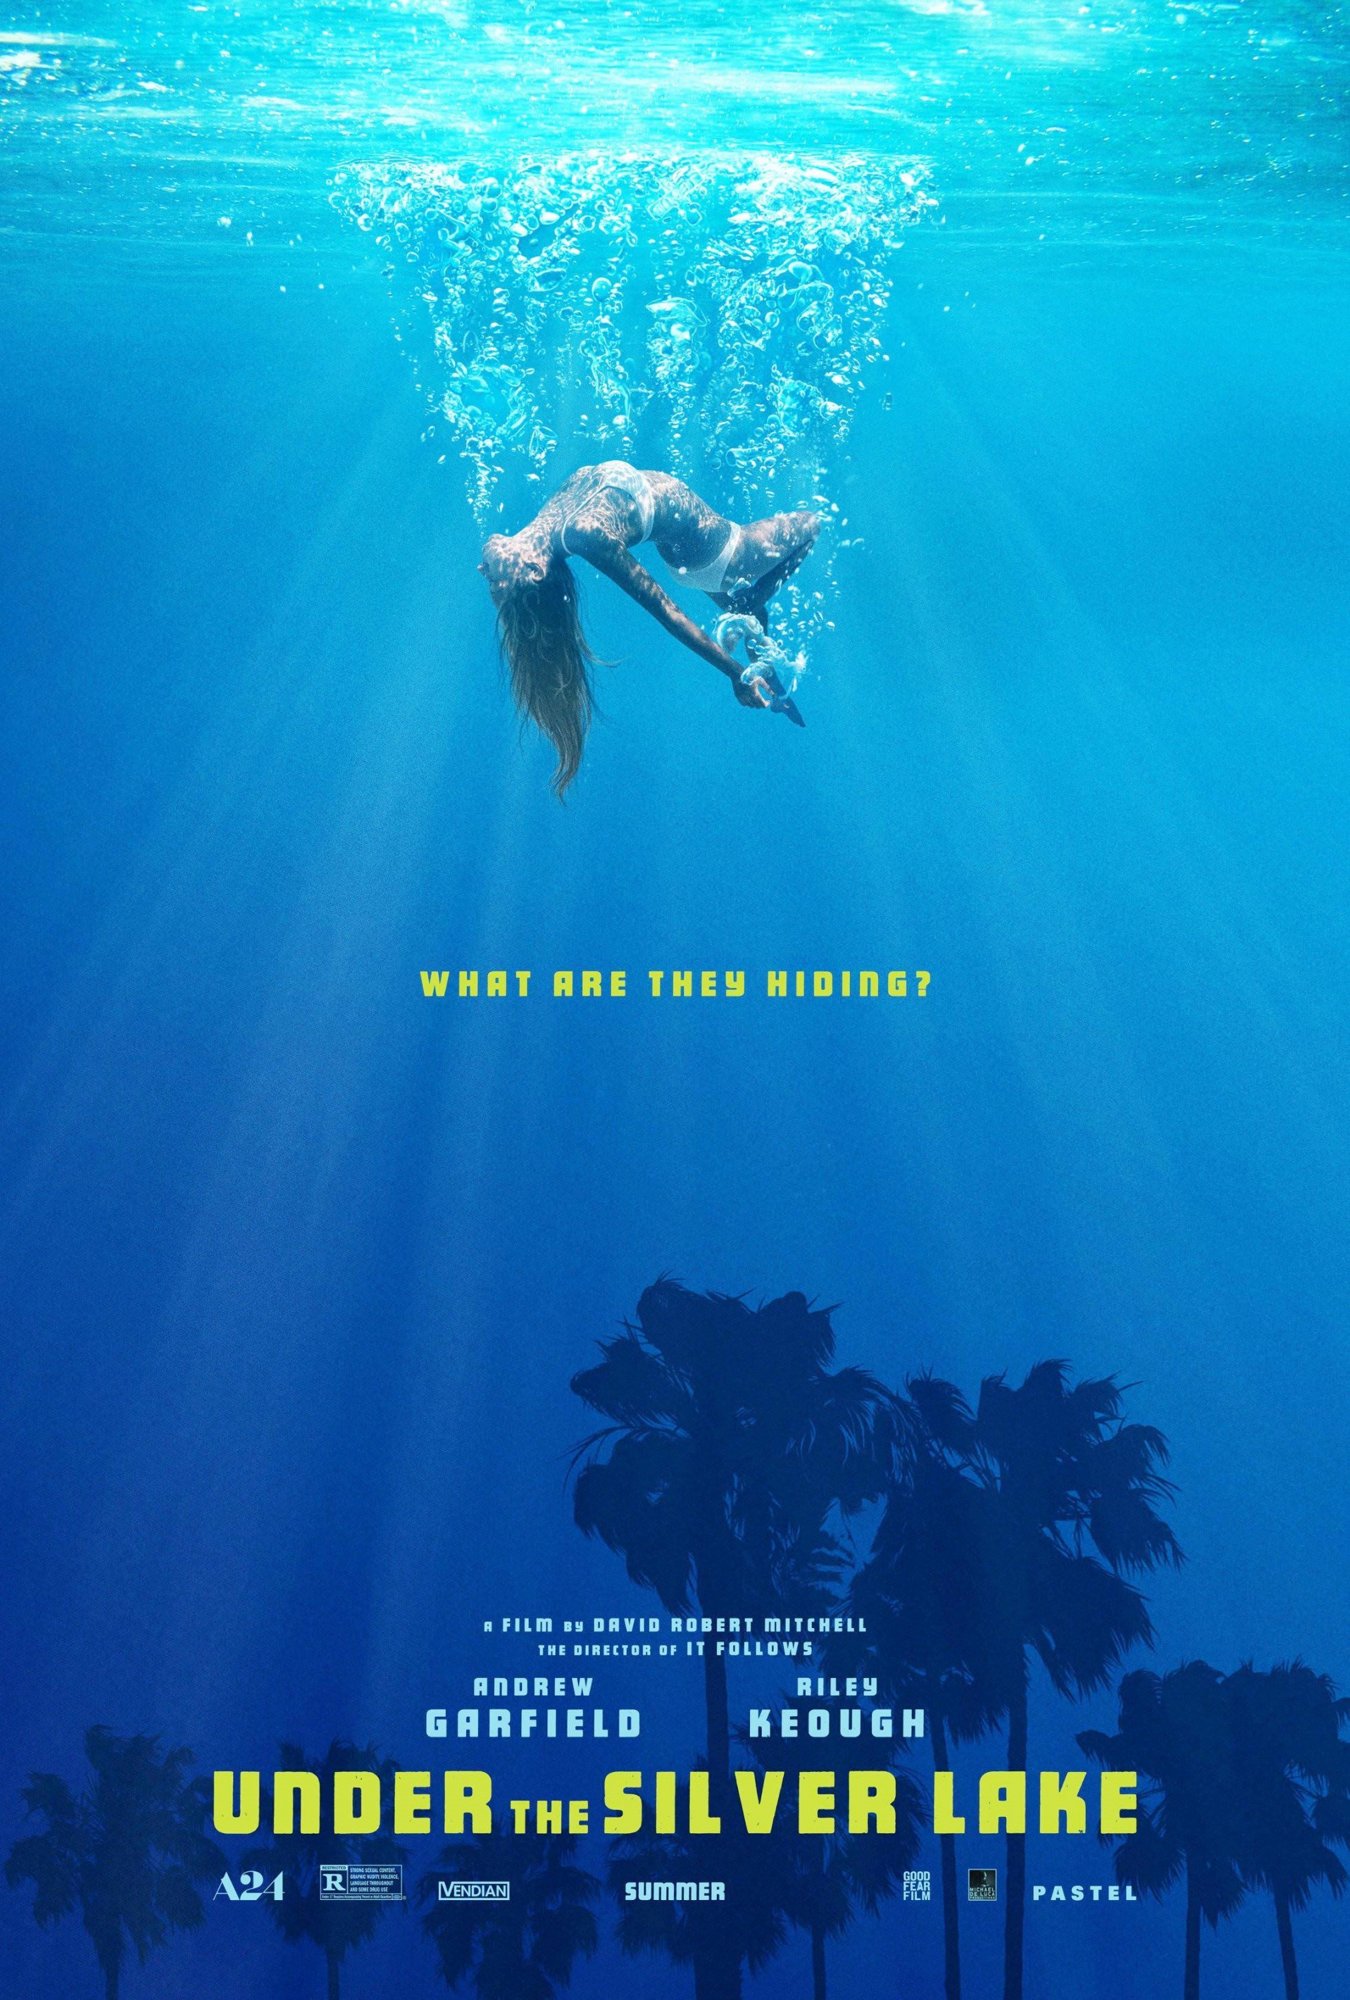 Poster of A24's Under the Silver Lake (2018)